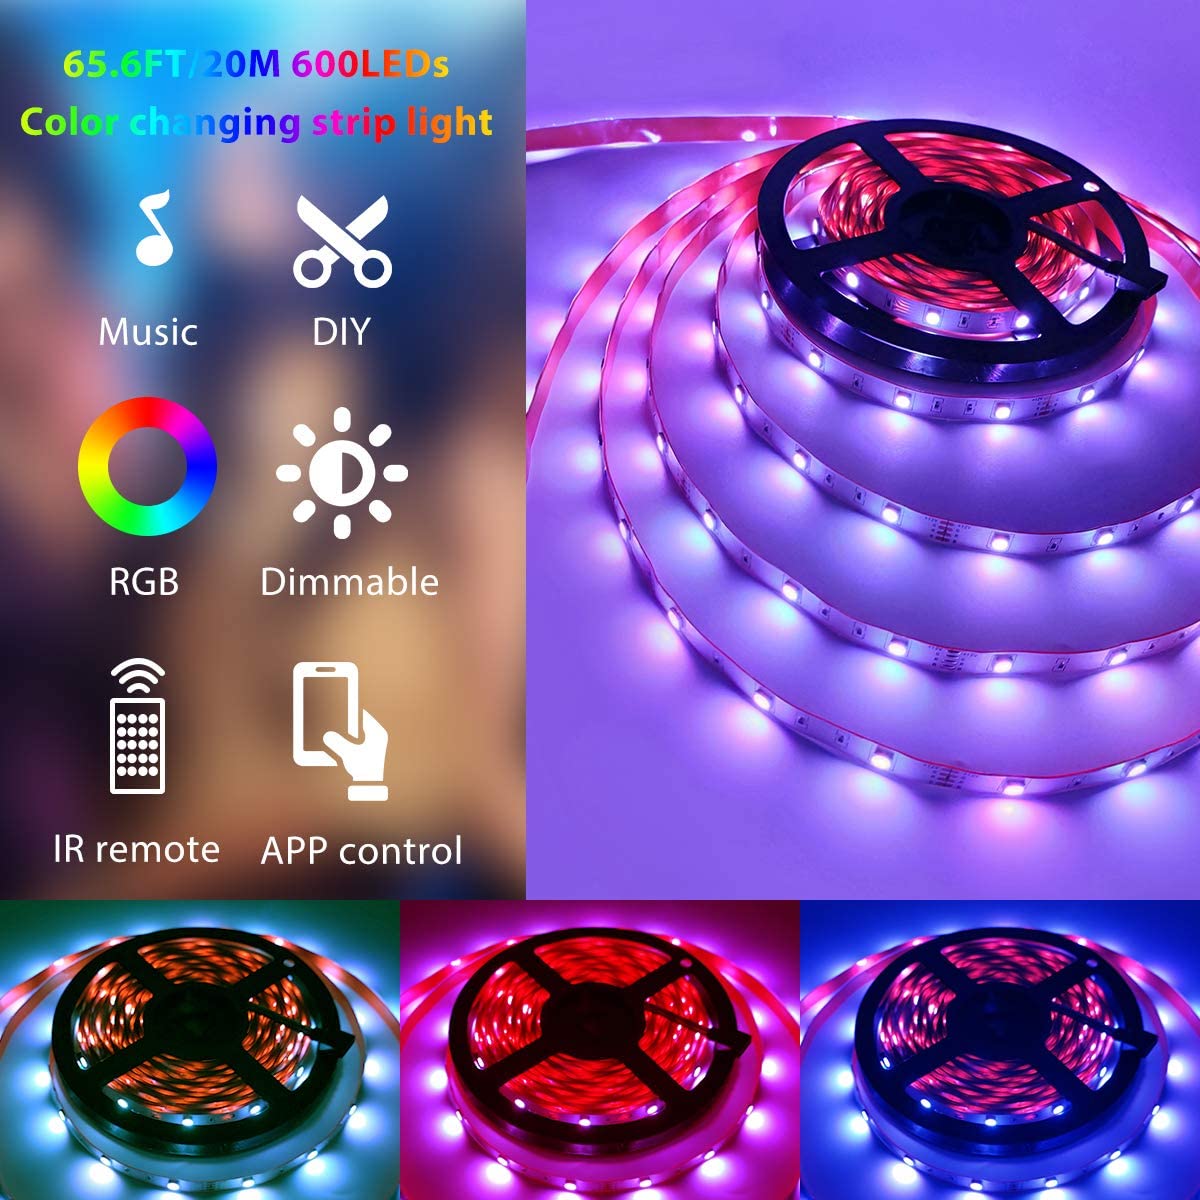 Laighter Led Strip Lights for Bedroom, 16.4 ft Smart Led Light Strip Music Sync with Upgraded 40 Keys Remote & App Control, Flexible DIY, RGB Color Changing, Tape Lights for Party Home